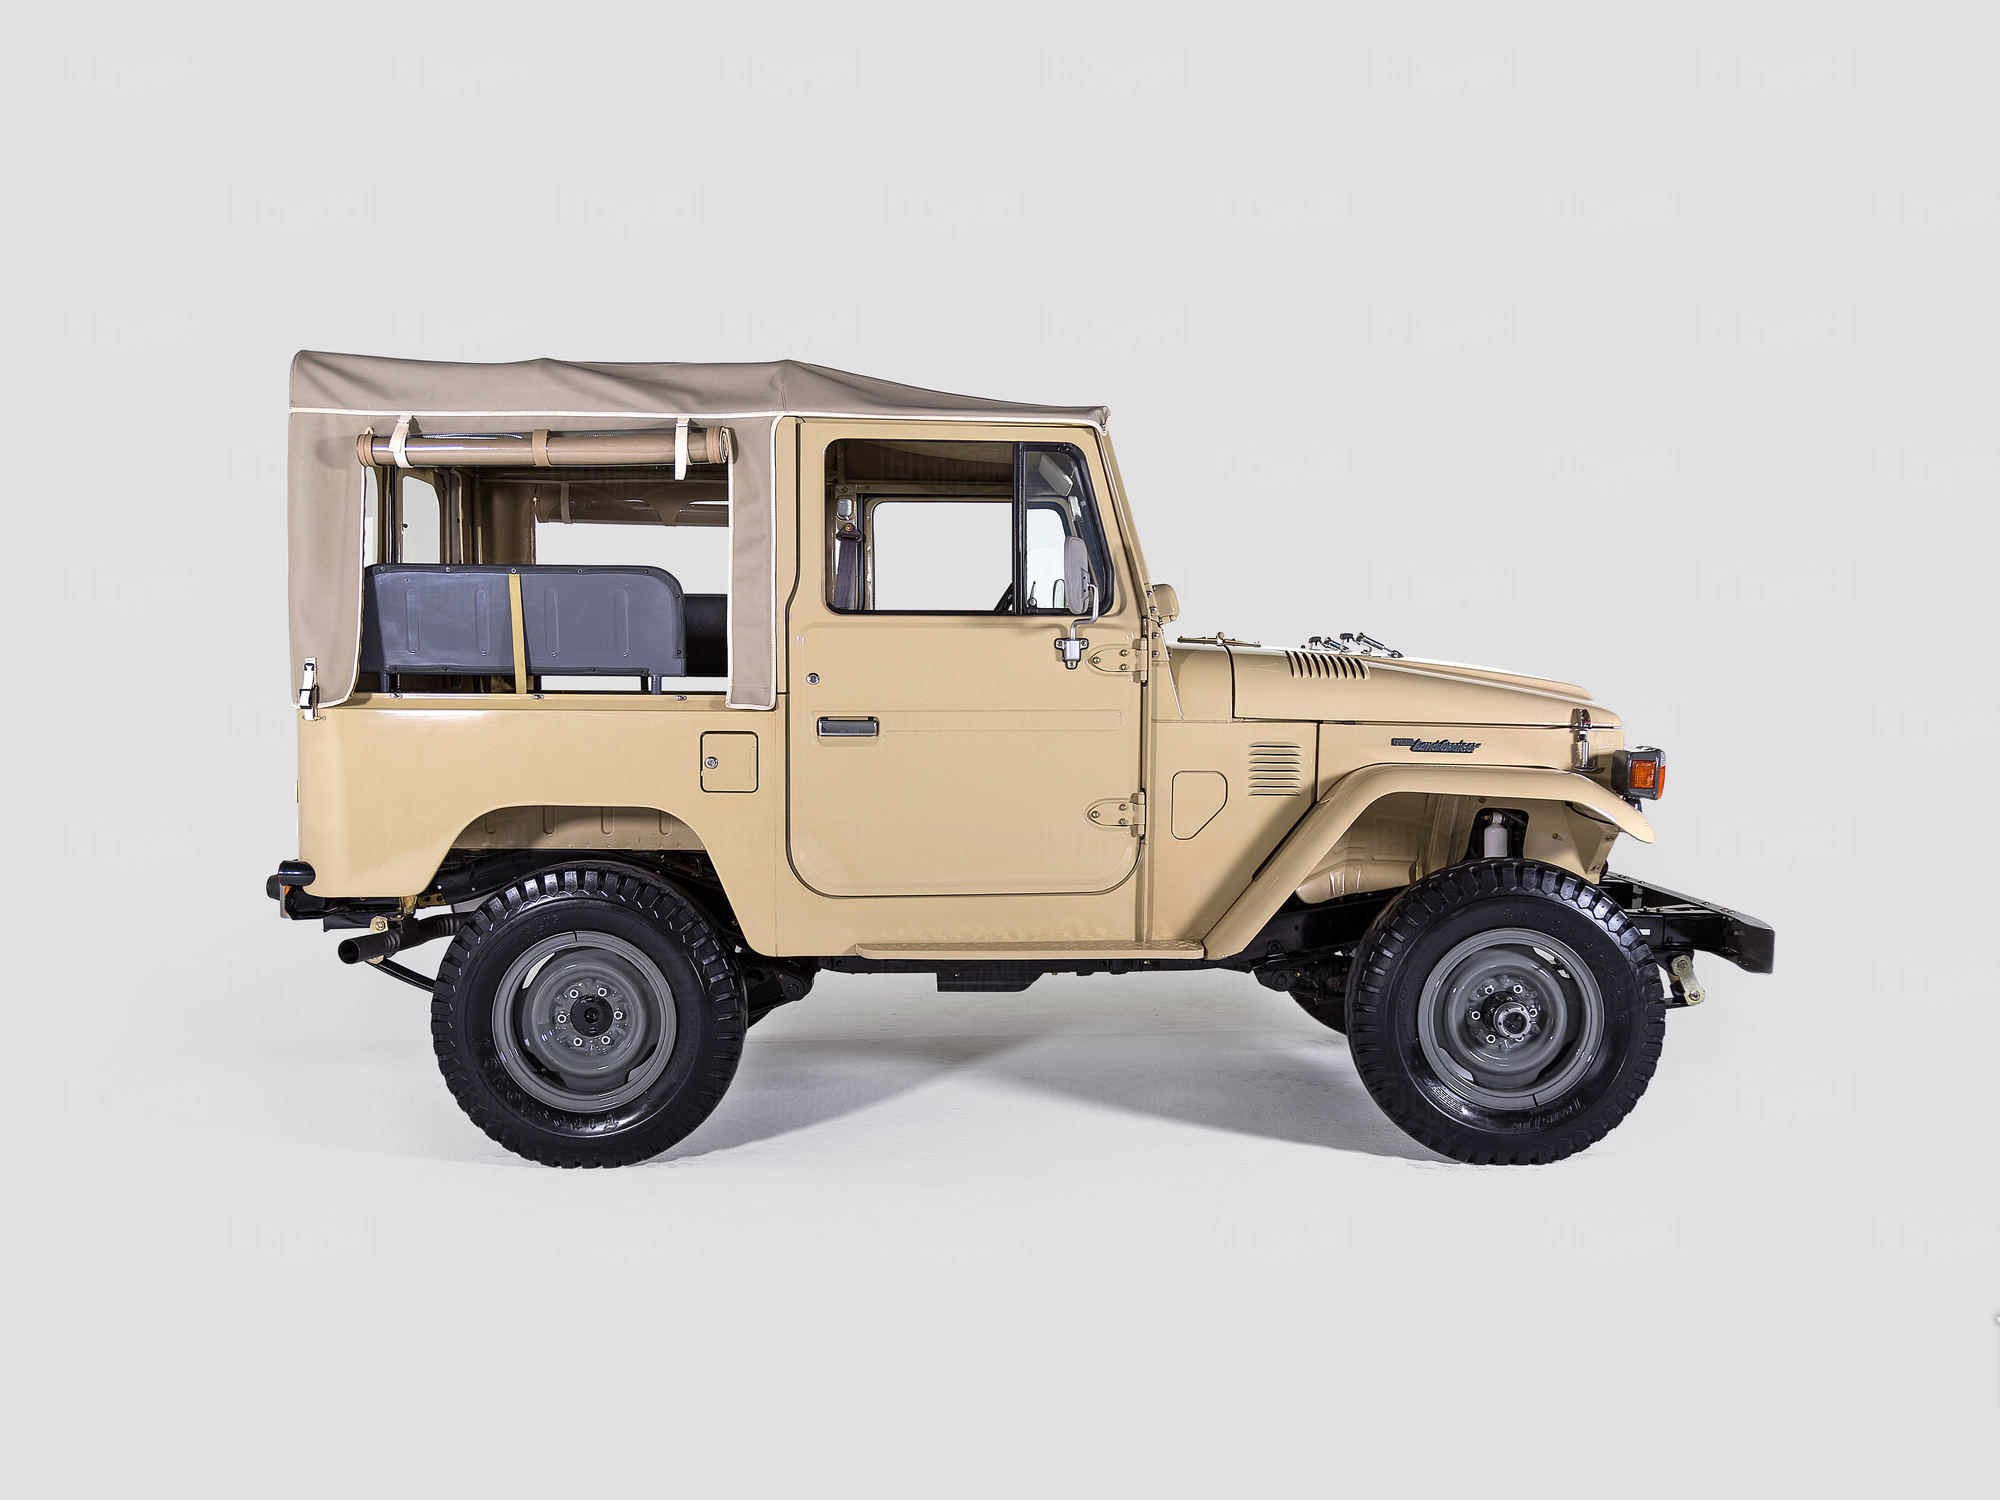 This striking Land Cruiser received our complete nut and bolt restoration.